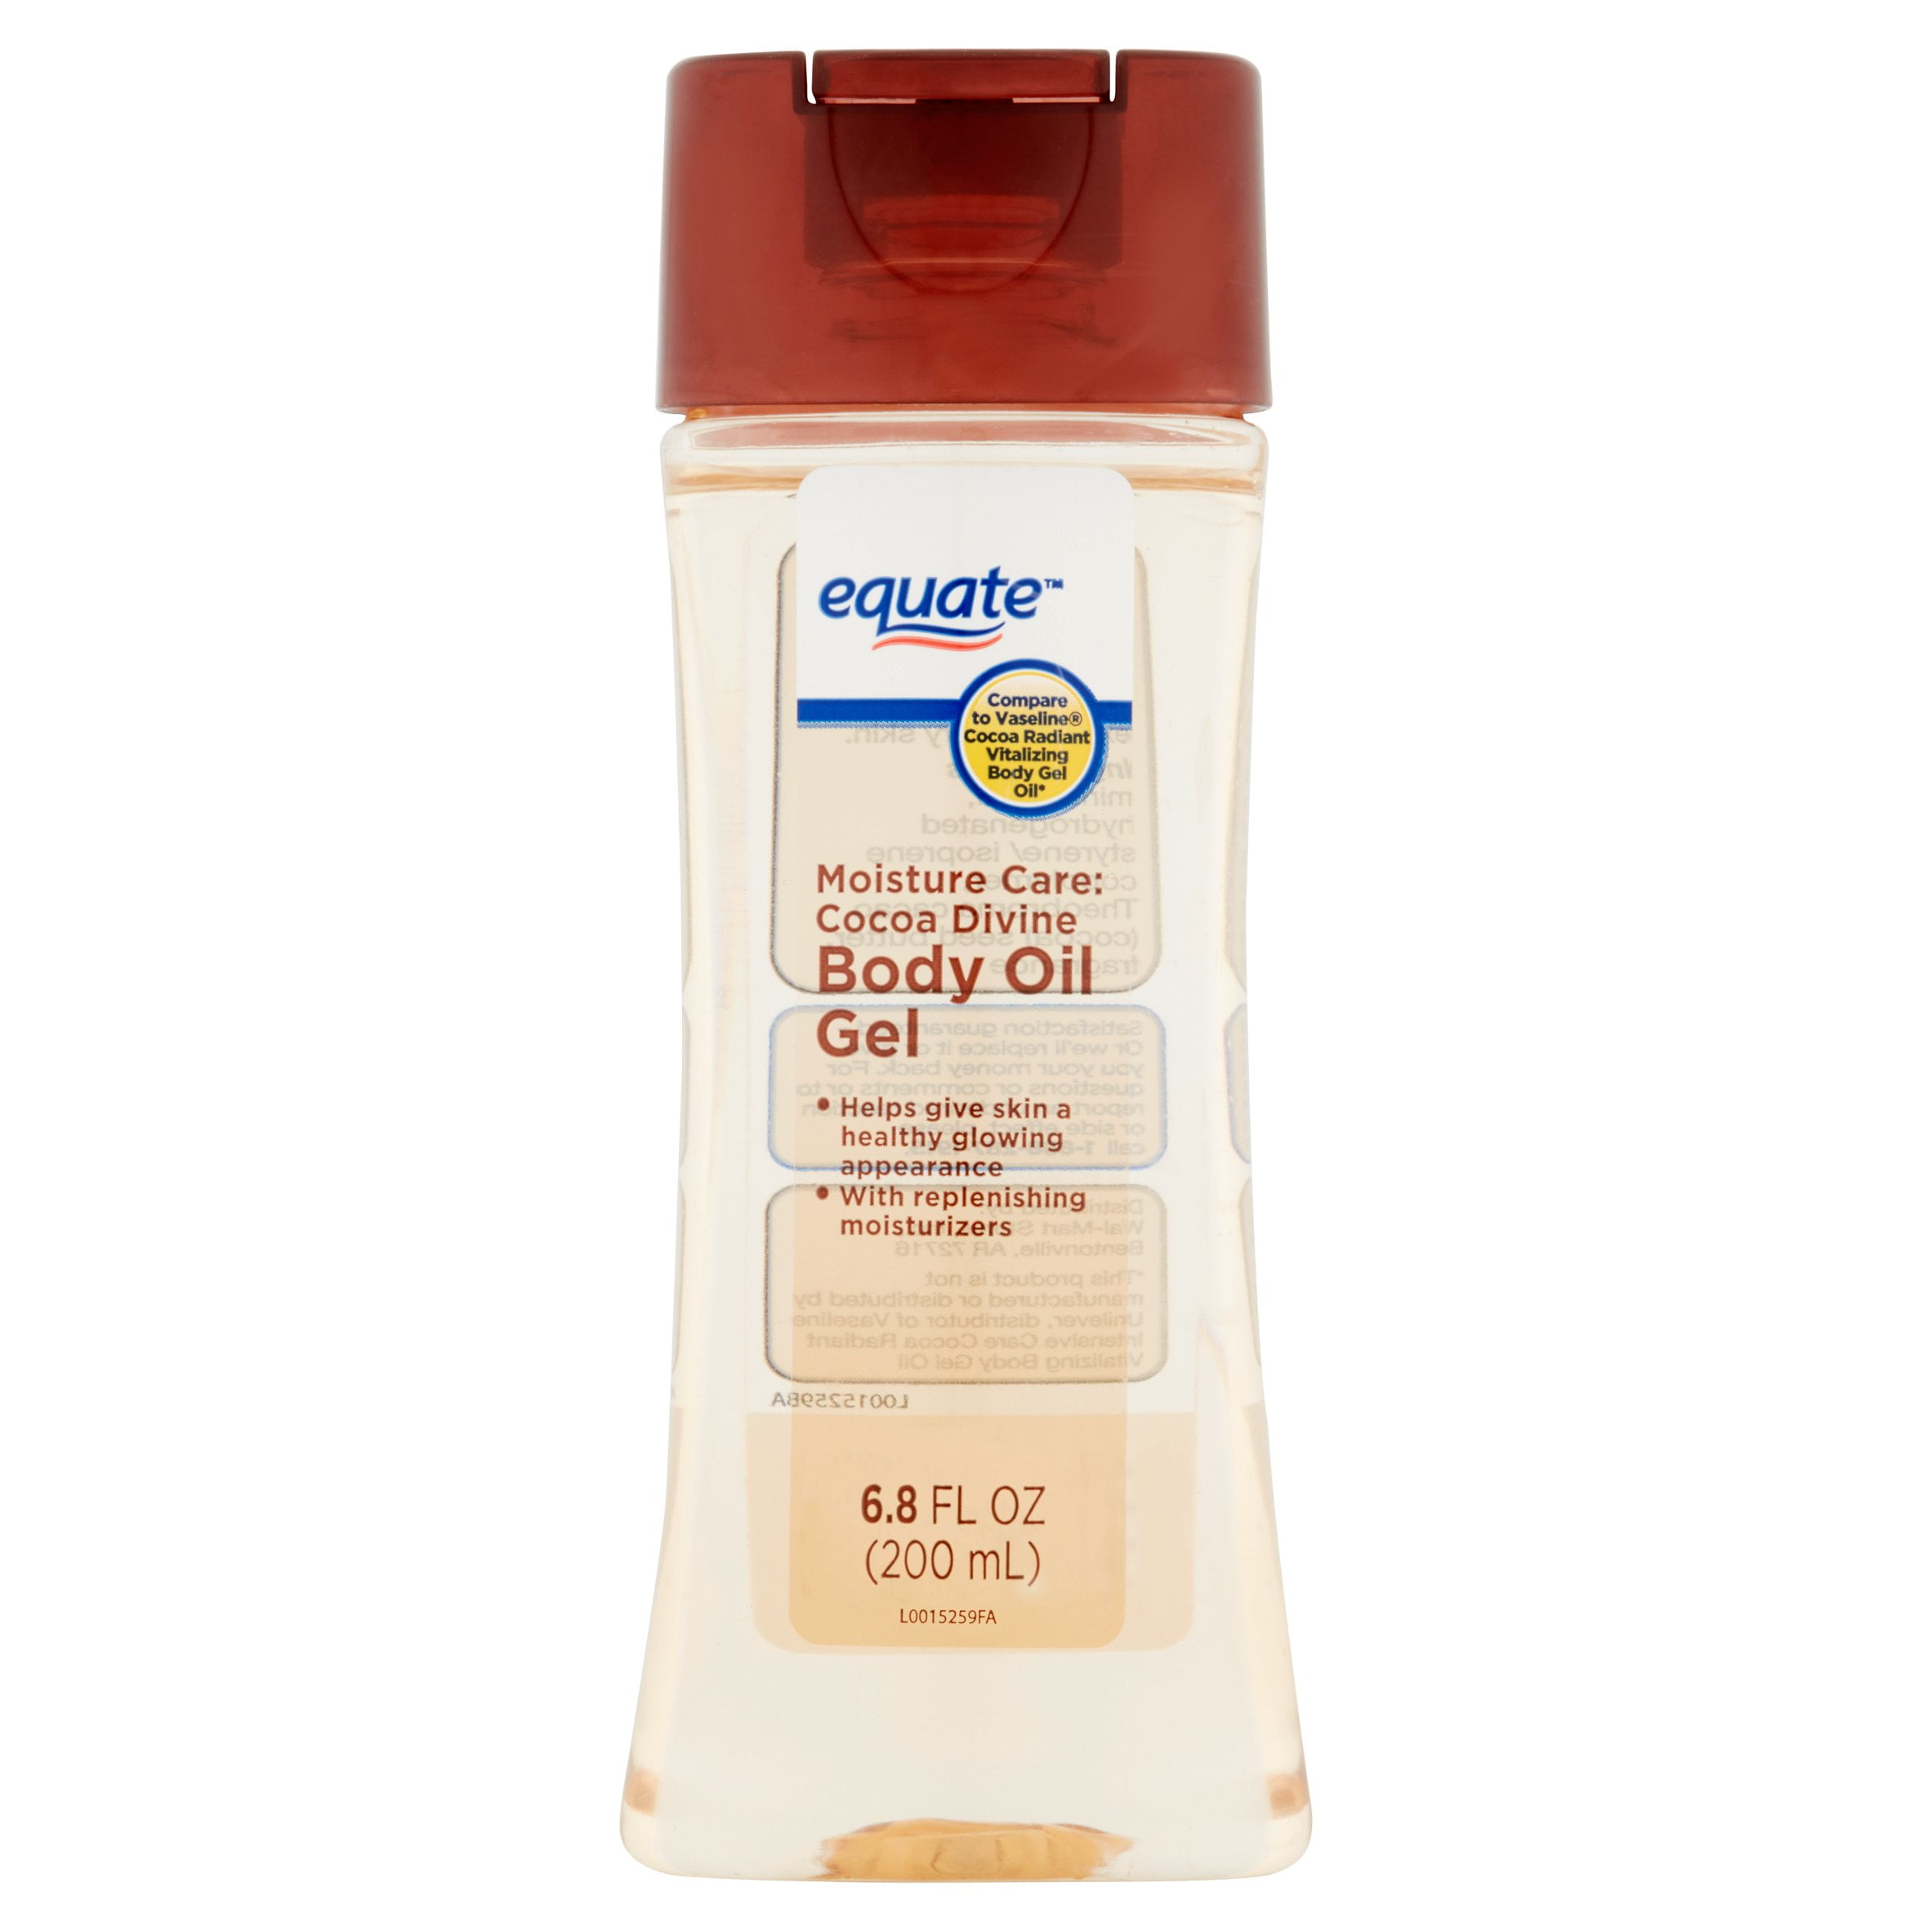 This Equate body oil includes added cocoa butter, which only.